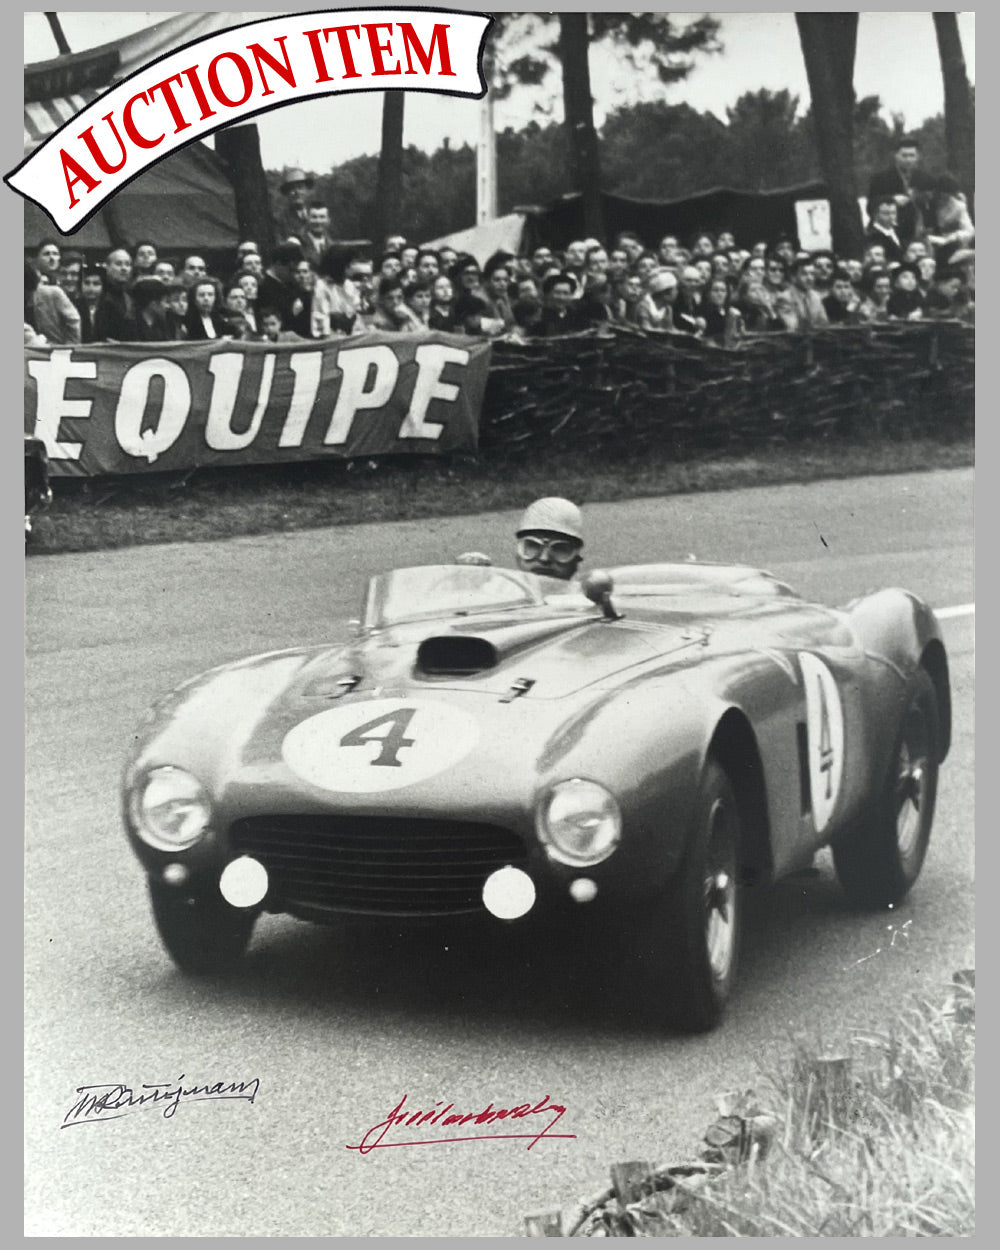 1 - 24 Hours of le Mans 1954 b&w photograph, autographed by Gonzalez and Trintignant